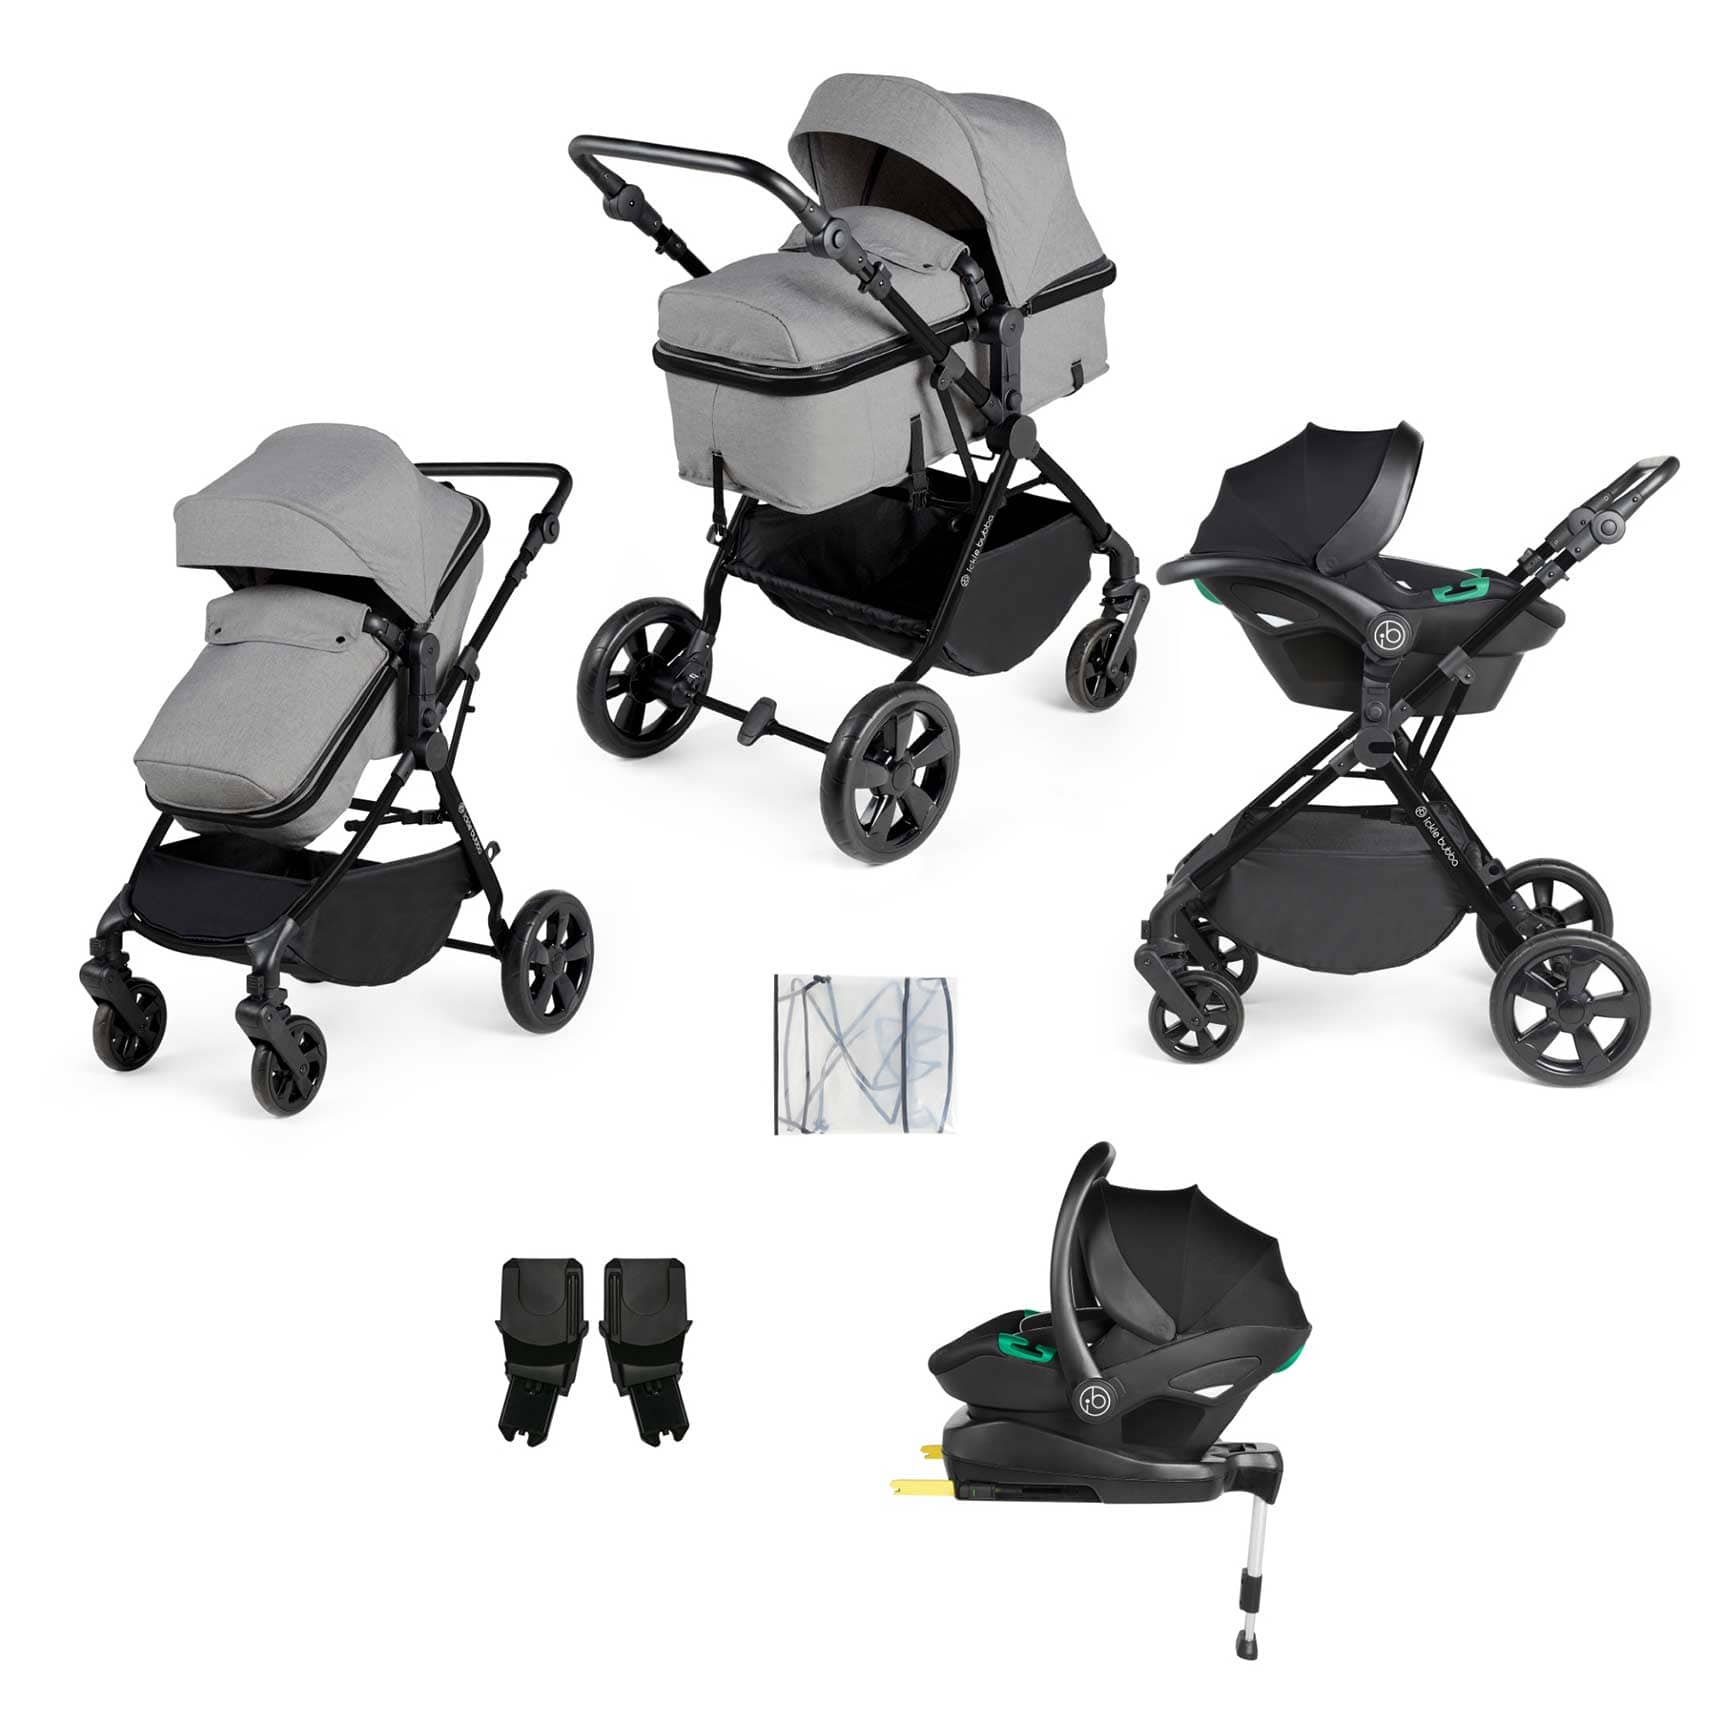 Ickle Bubba Comet All-in-One I-Size Travel System with Isofix Base in Space Grey Baby Prams 10-008-300-014 5056515025804